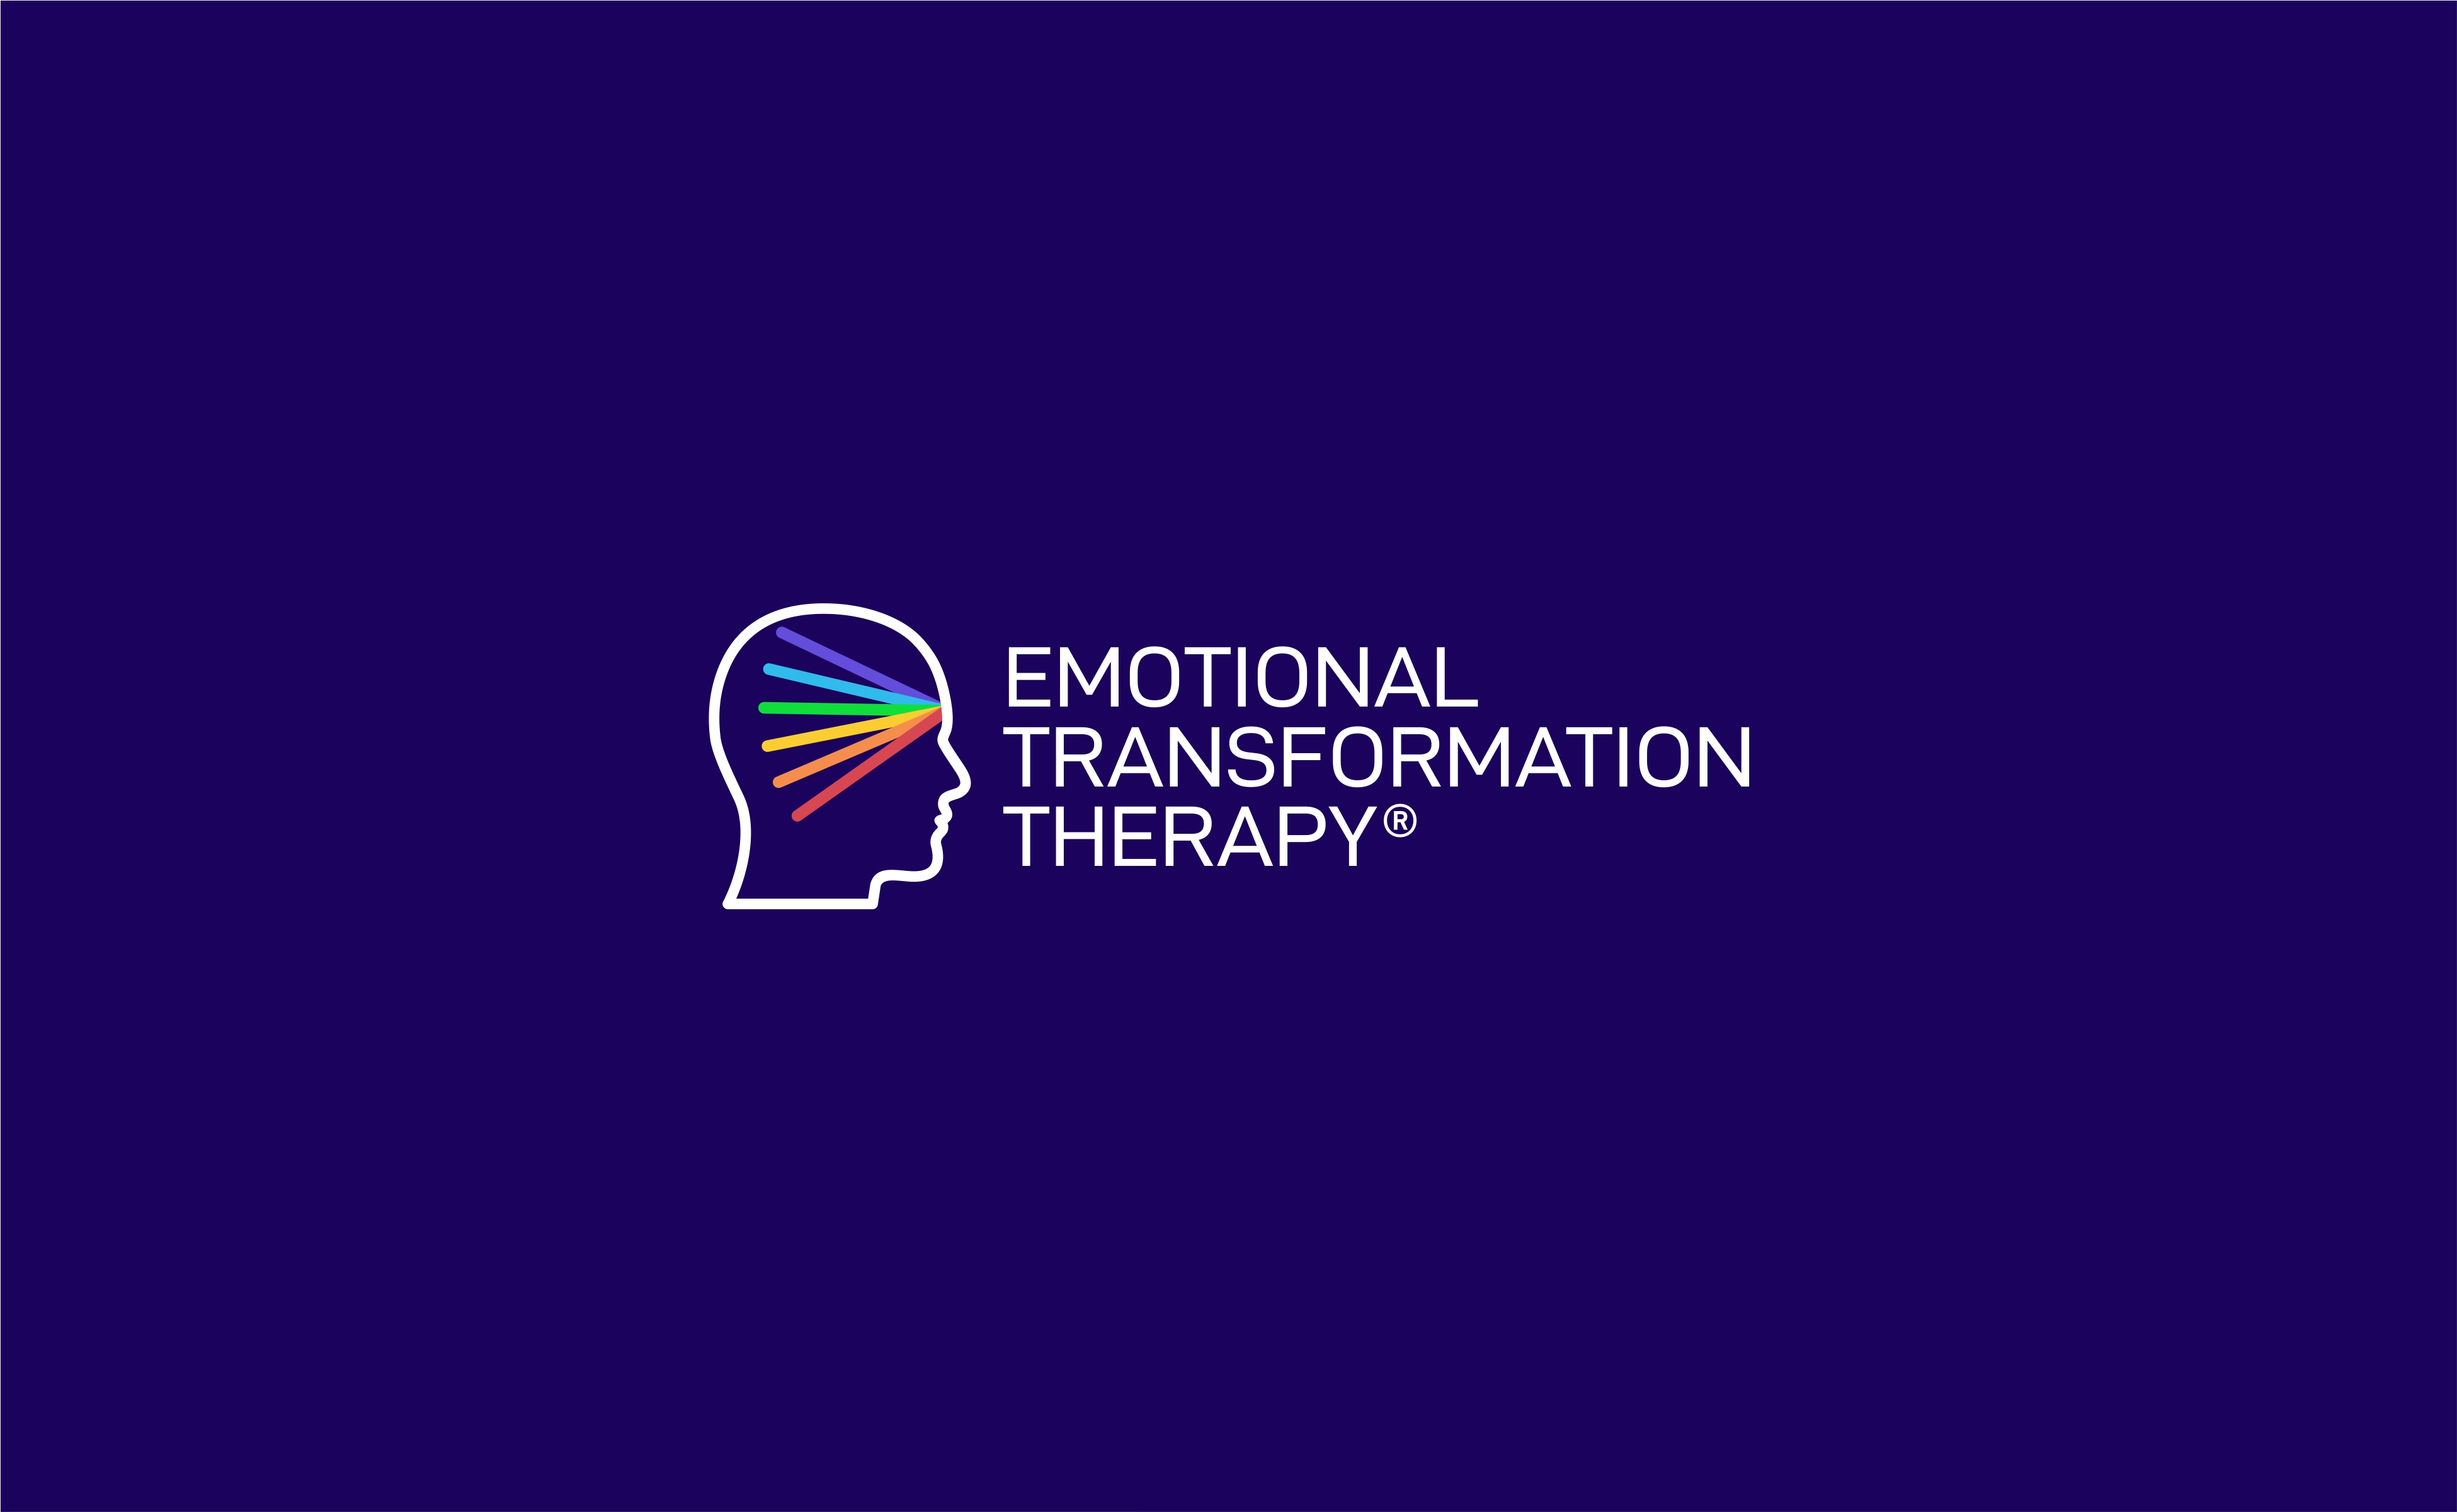 EMOTIONAL-TRANSFORMATION-THERAPY